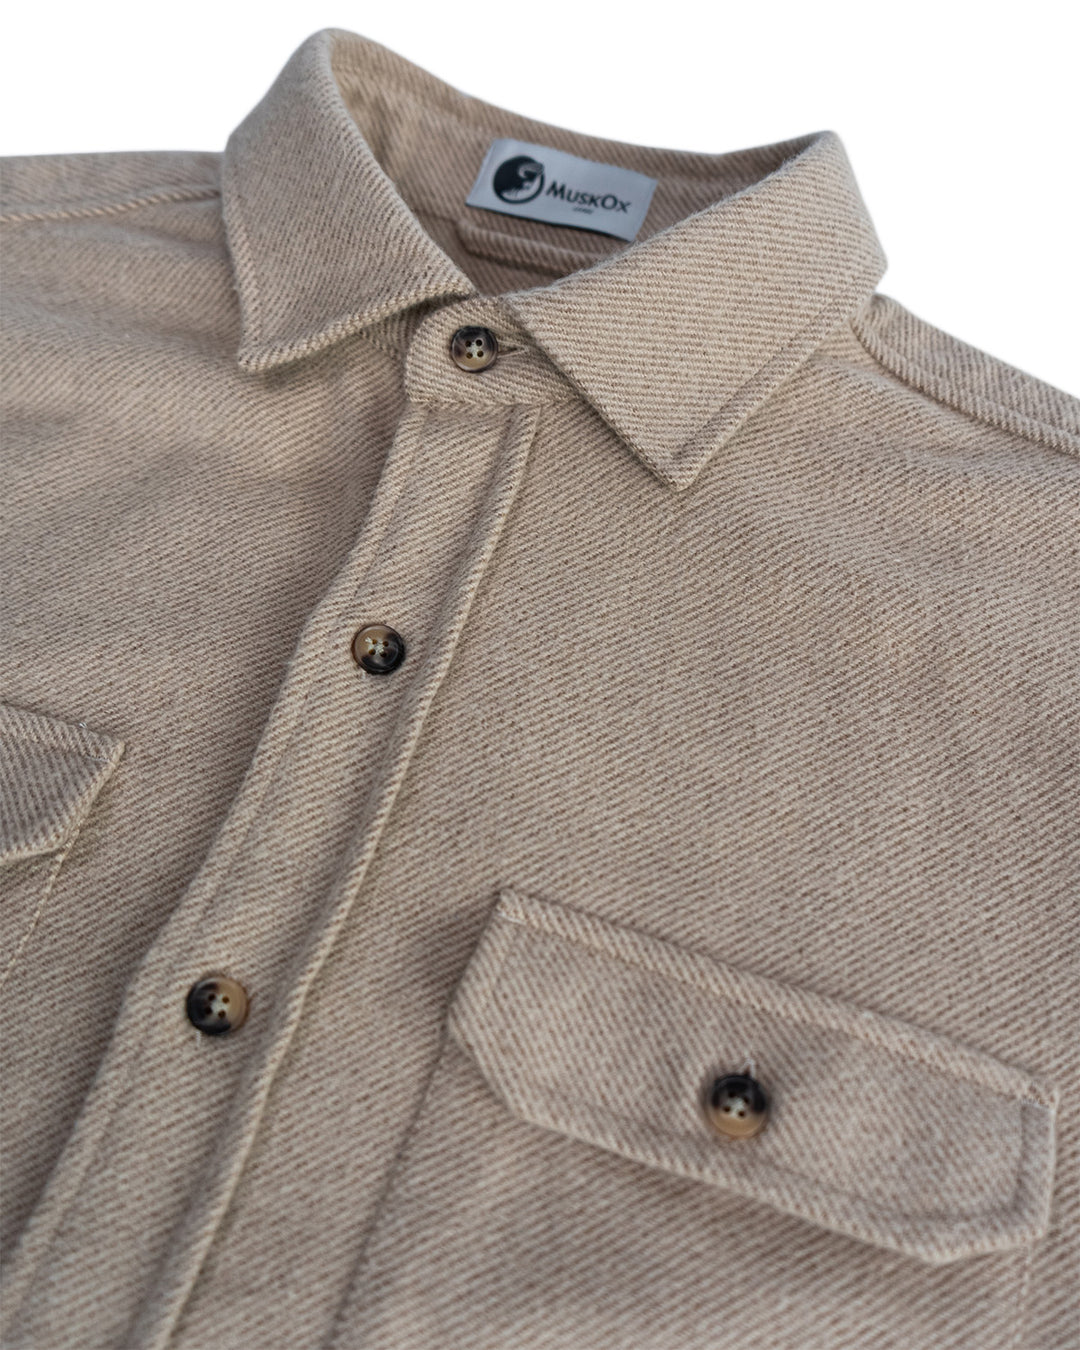 Grand Flannel Shirt in Camel, Solid Tan